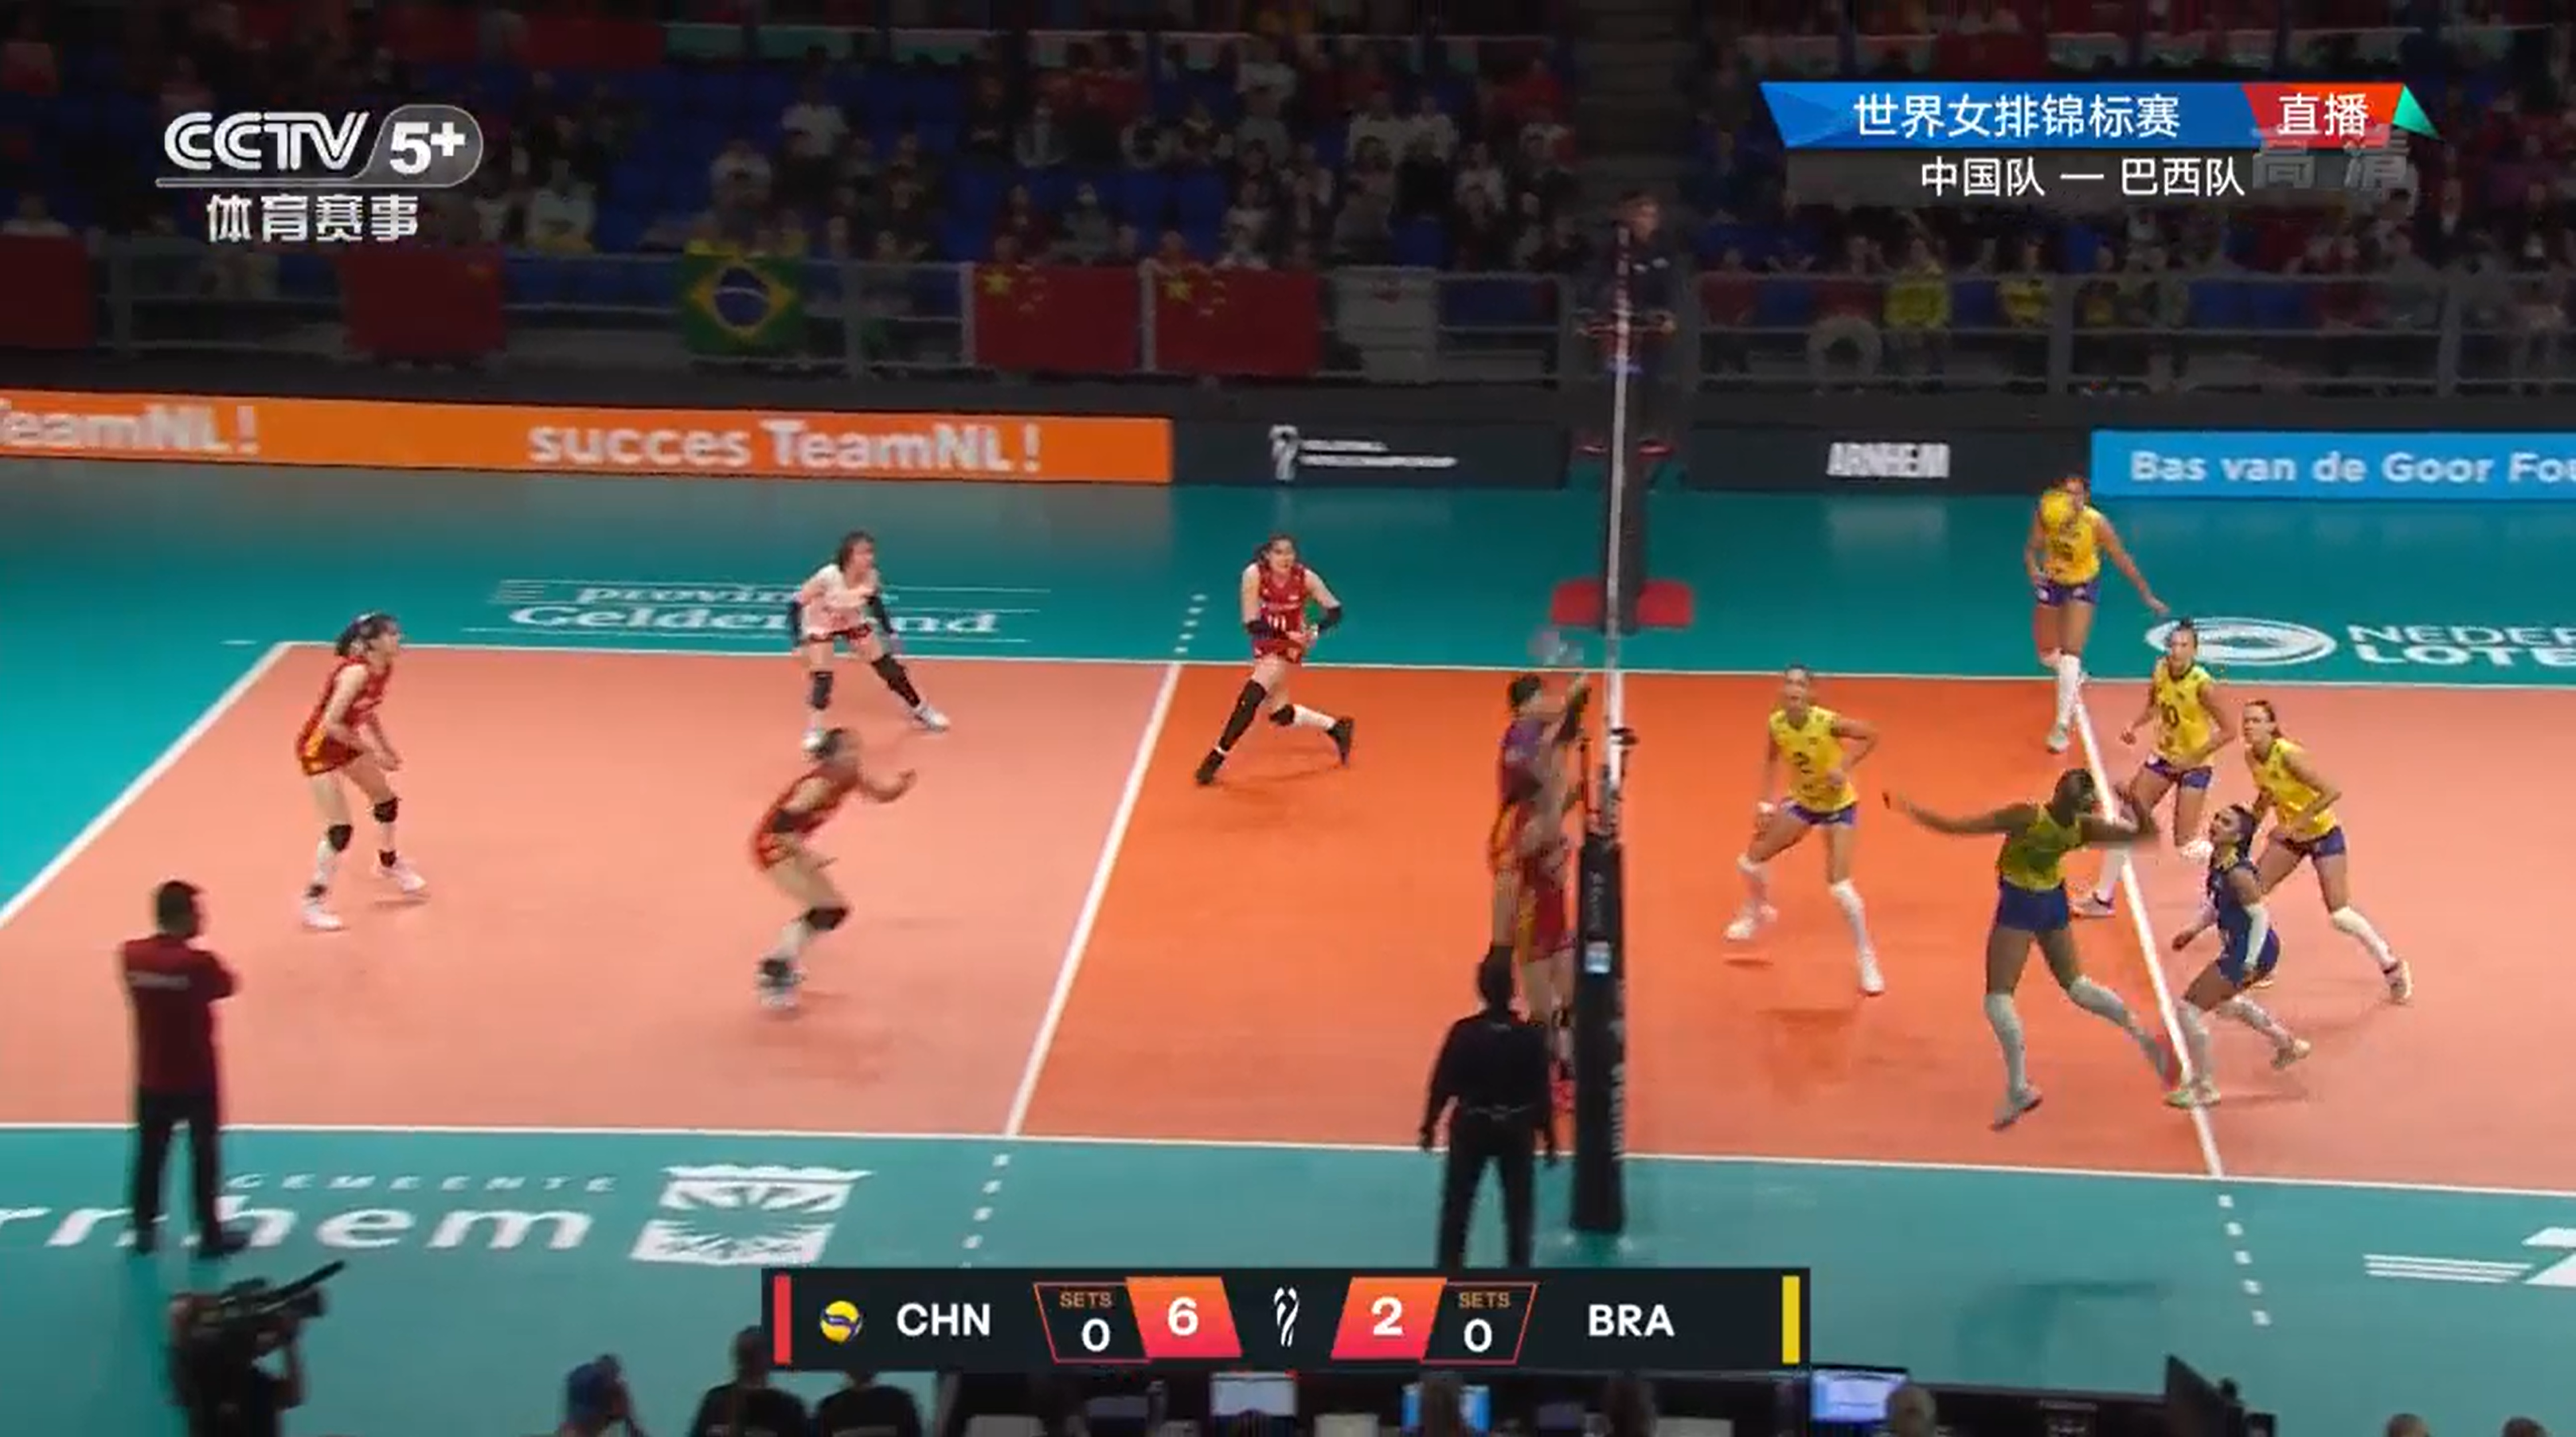 China (L) vs. Brazil at the FIVB Volleyball Women's World Championship match in Arnhem, the Netherlands, October 1, 2022. /CMG